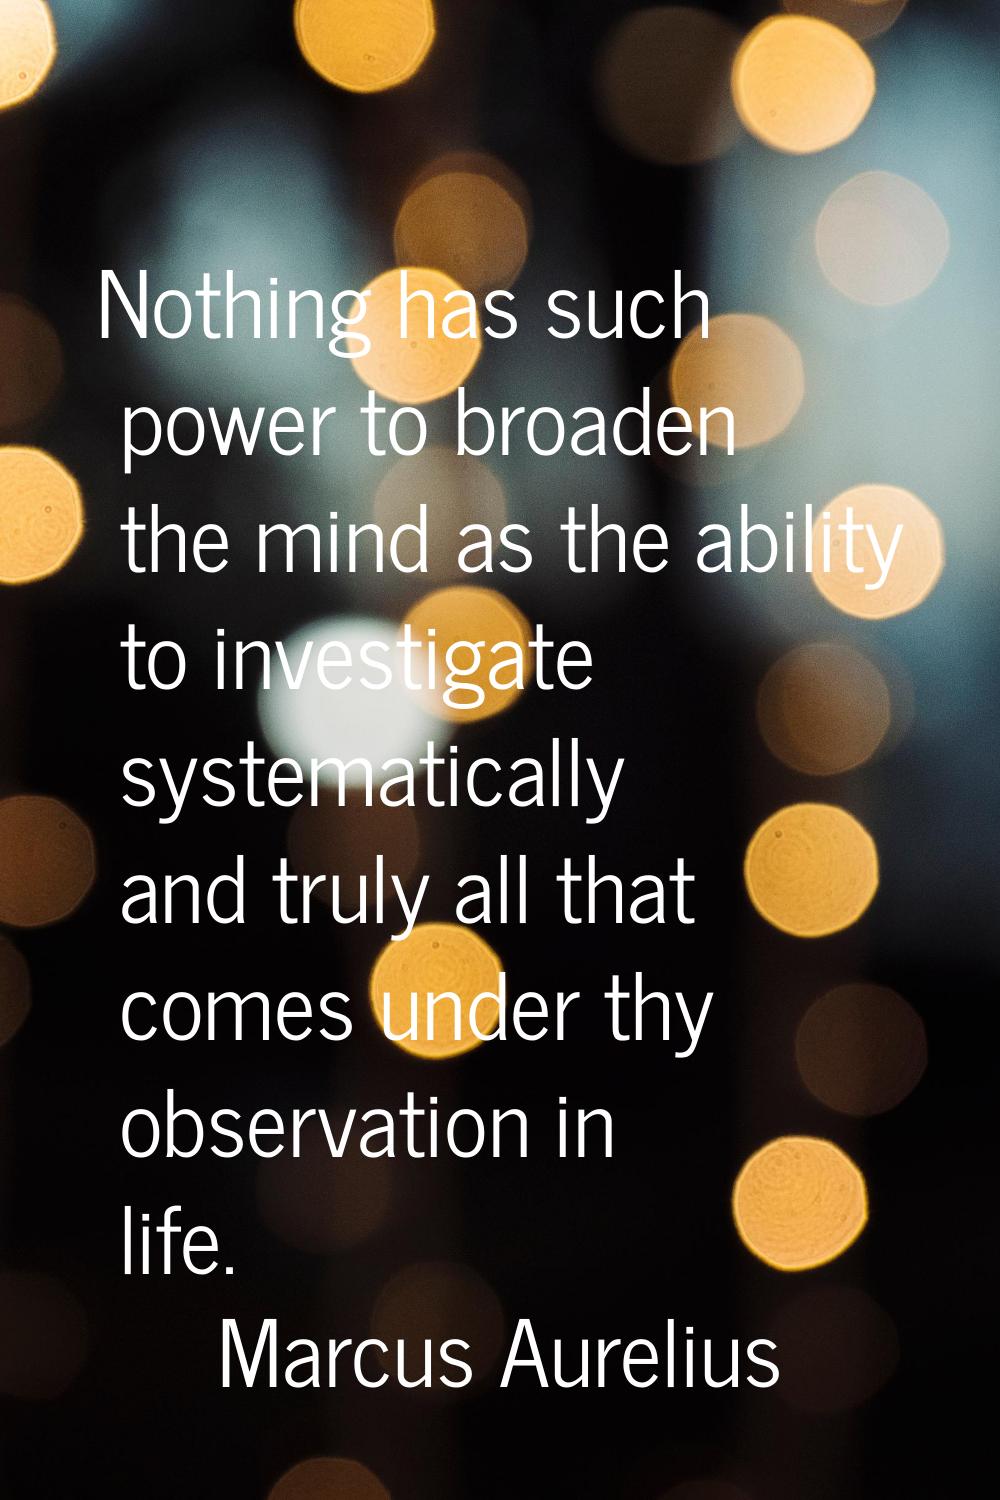 Nothing has such power to broaden the mind as the ability to investigate systematically and truly a